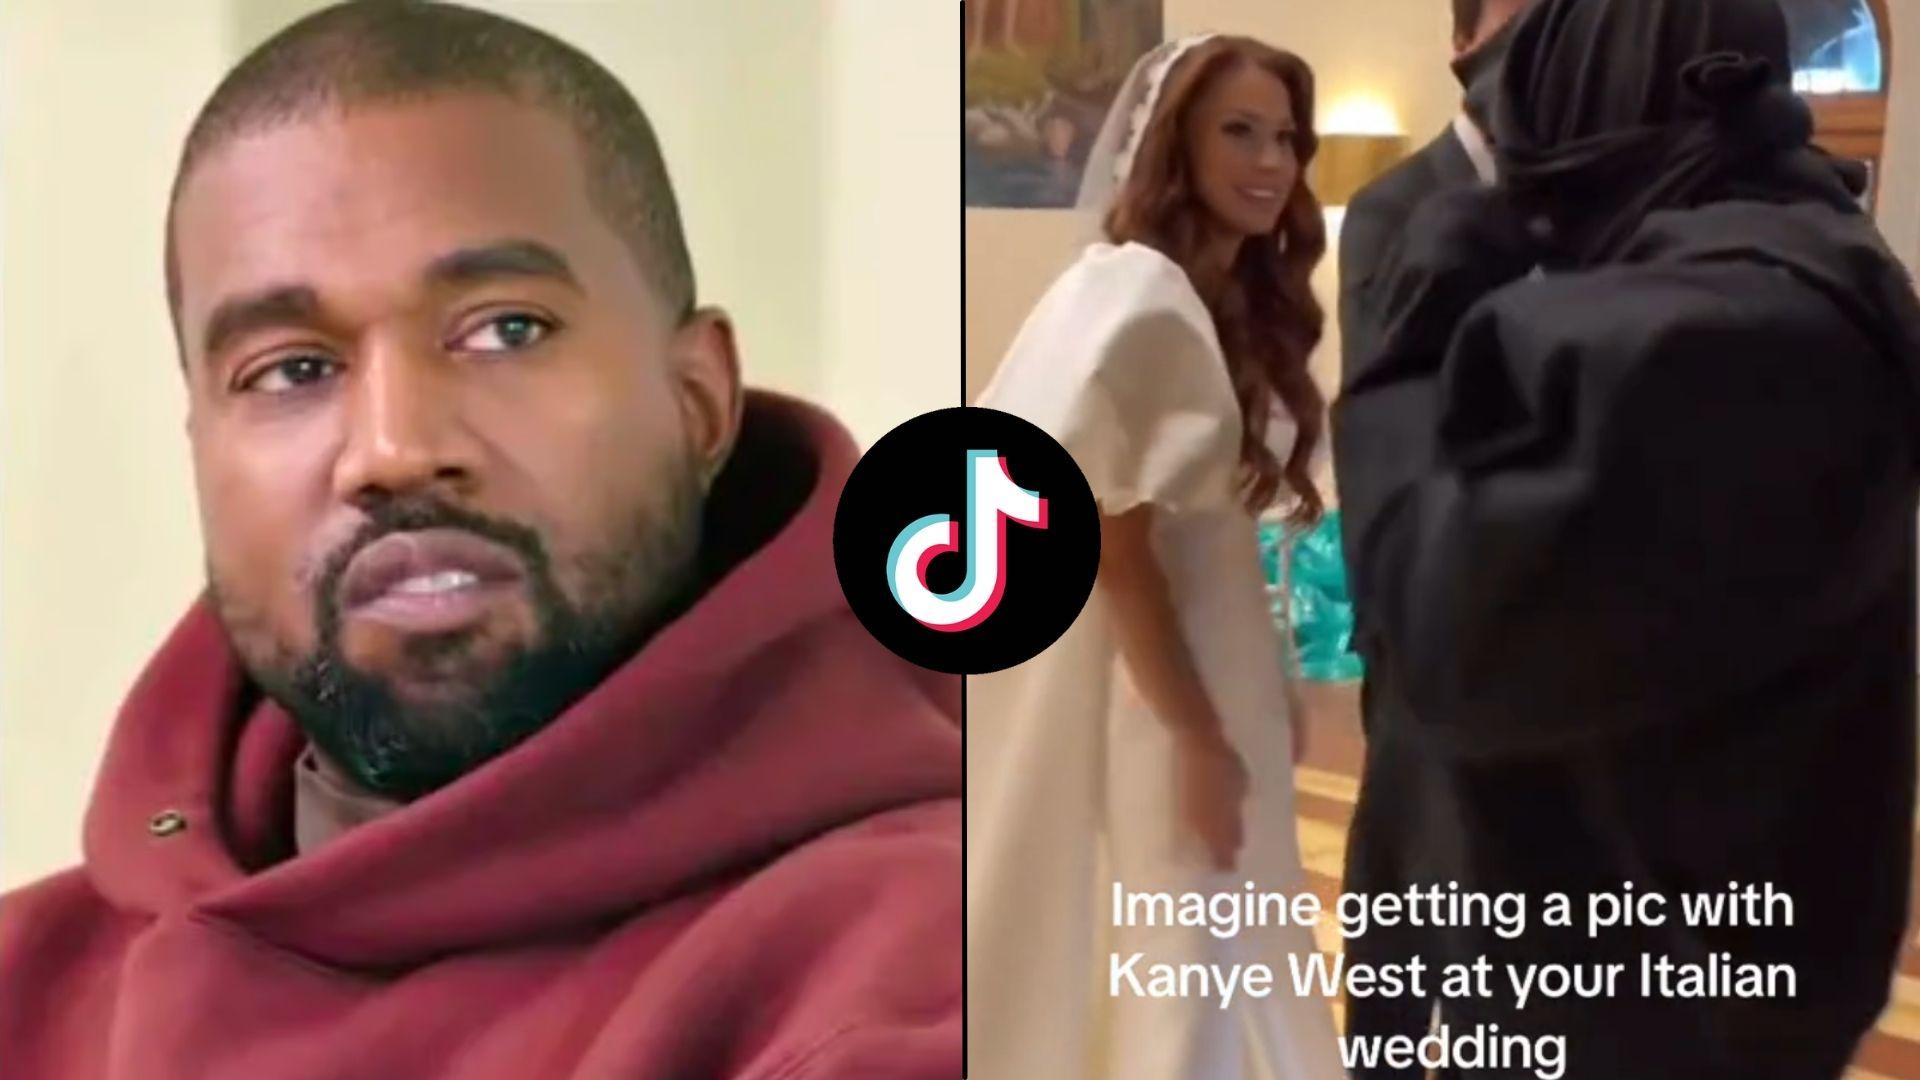 Kanye West in red hoodie side-by-side with man next to wedding party dressed in black